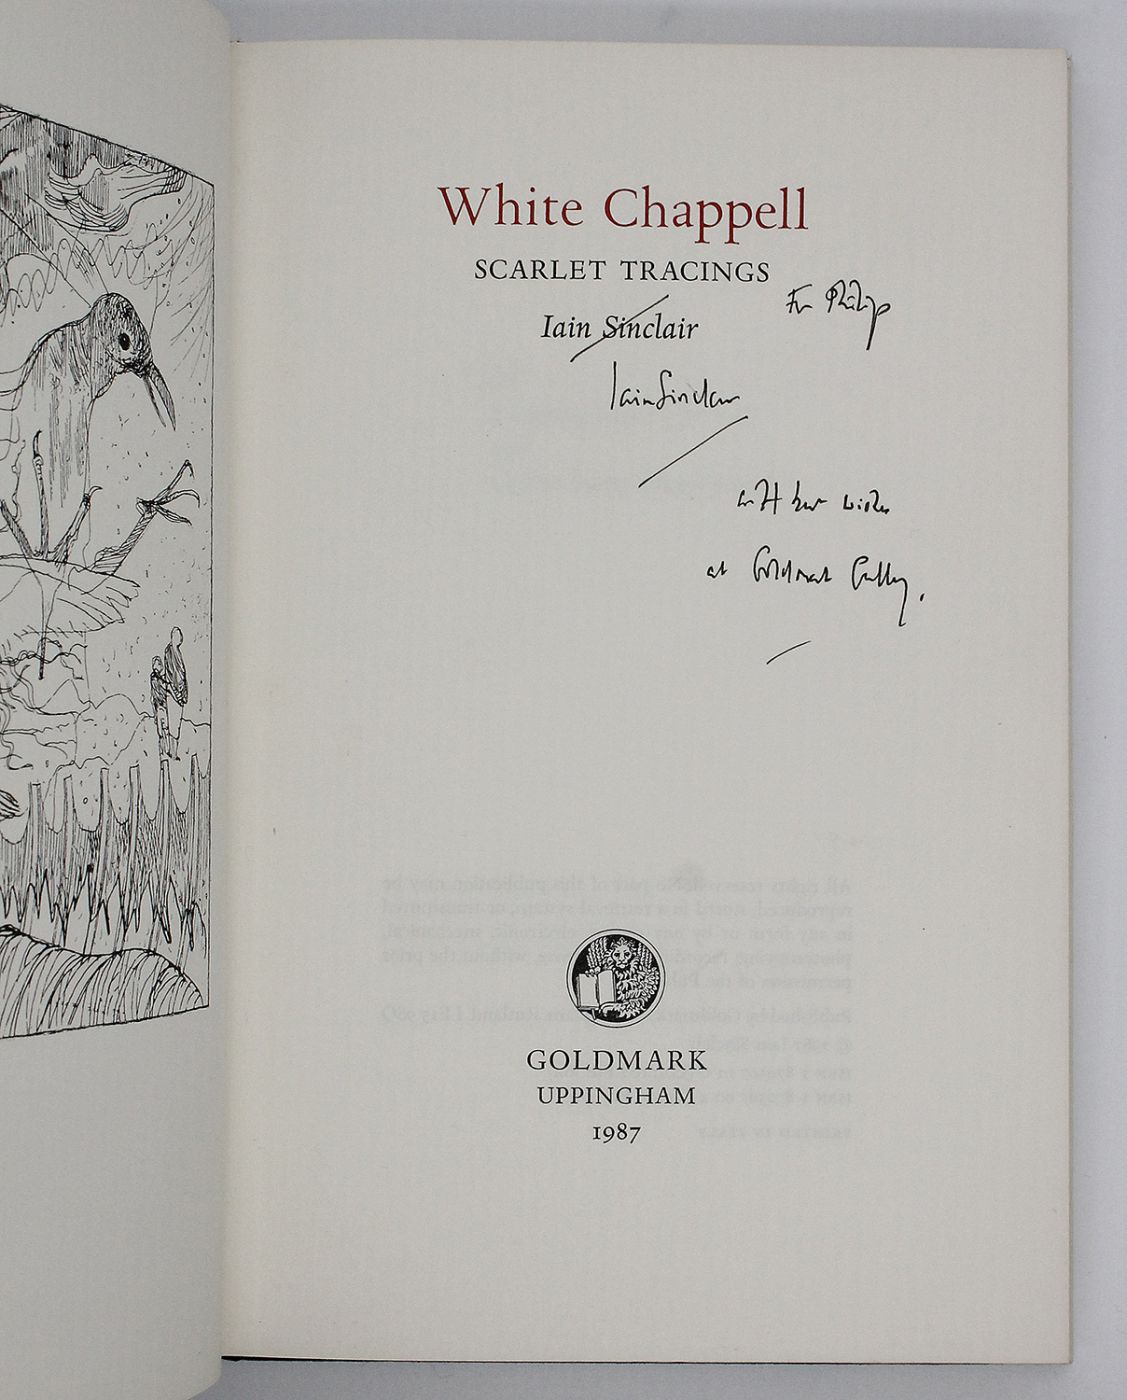 WHITE CHAPPELL, SCARLET TRACINGS -  image 2